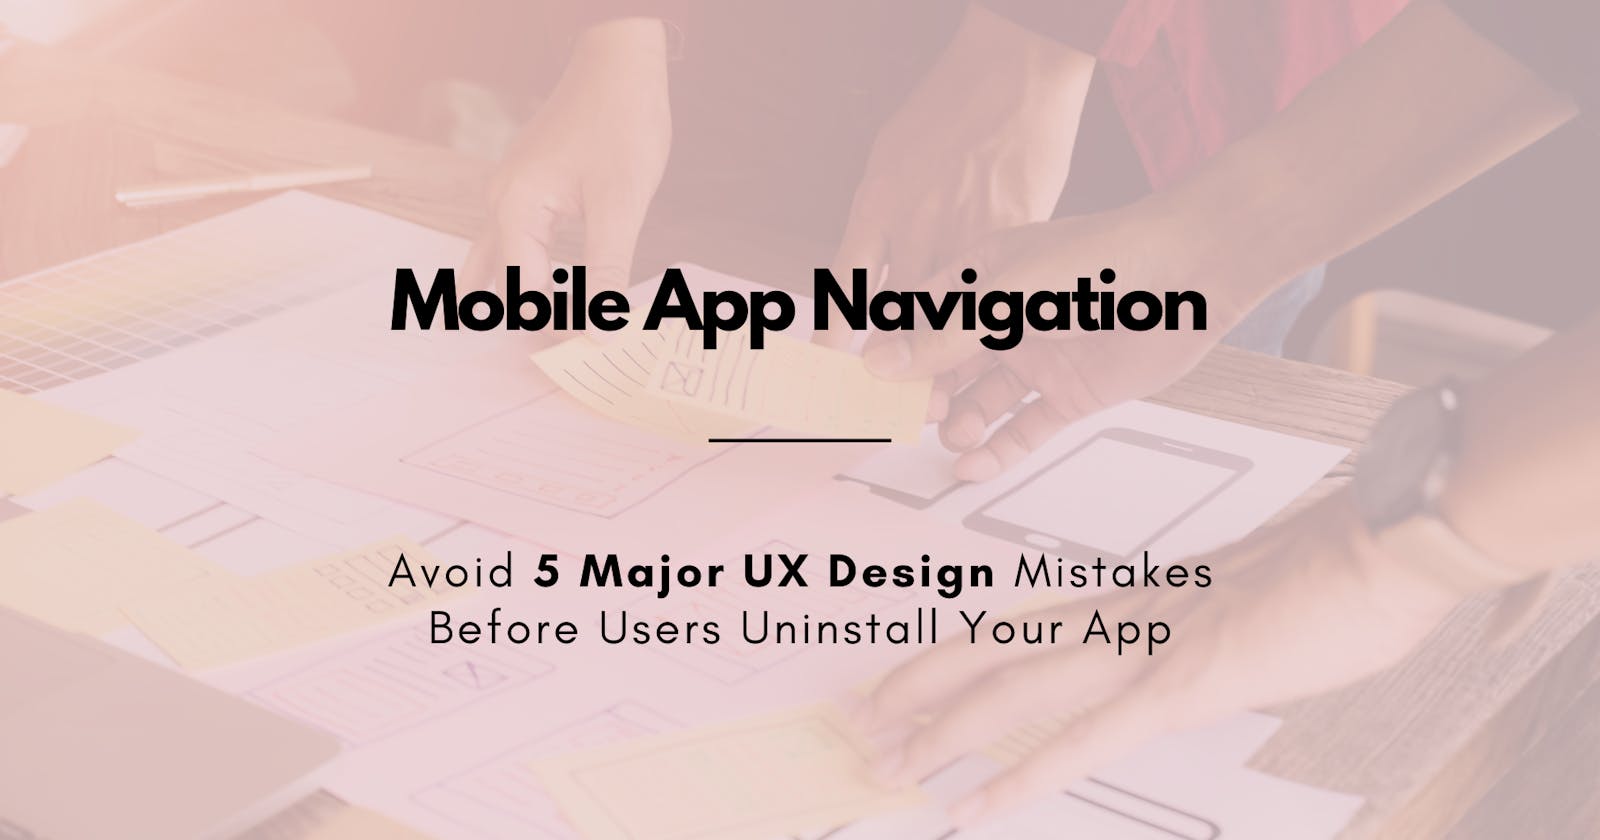 5 Major UX Design Mistakes To Avoid Before Users Uninstall Your App 😲